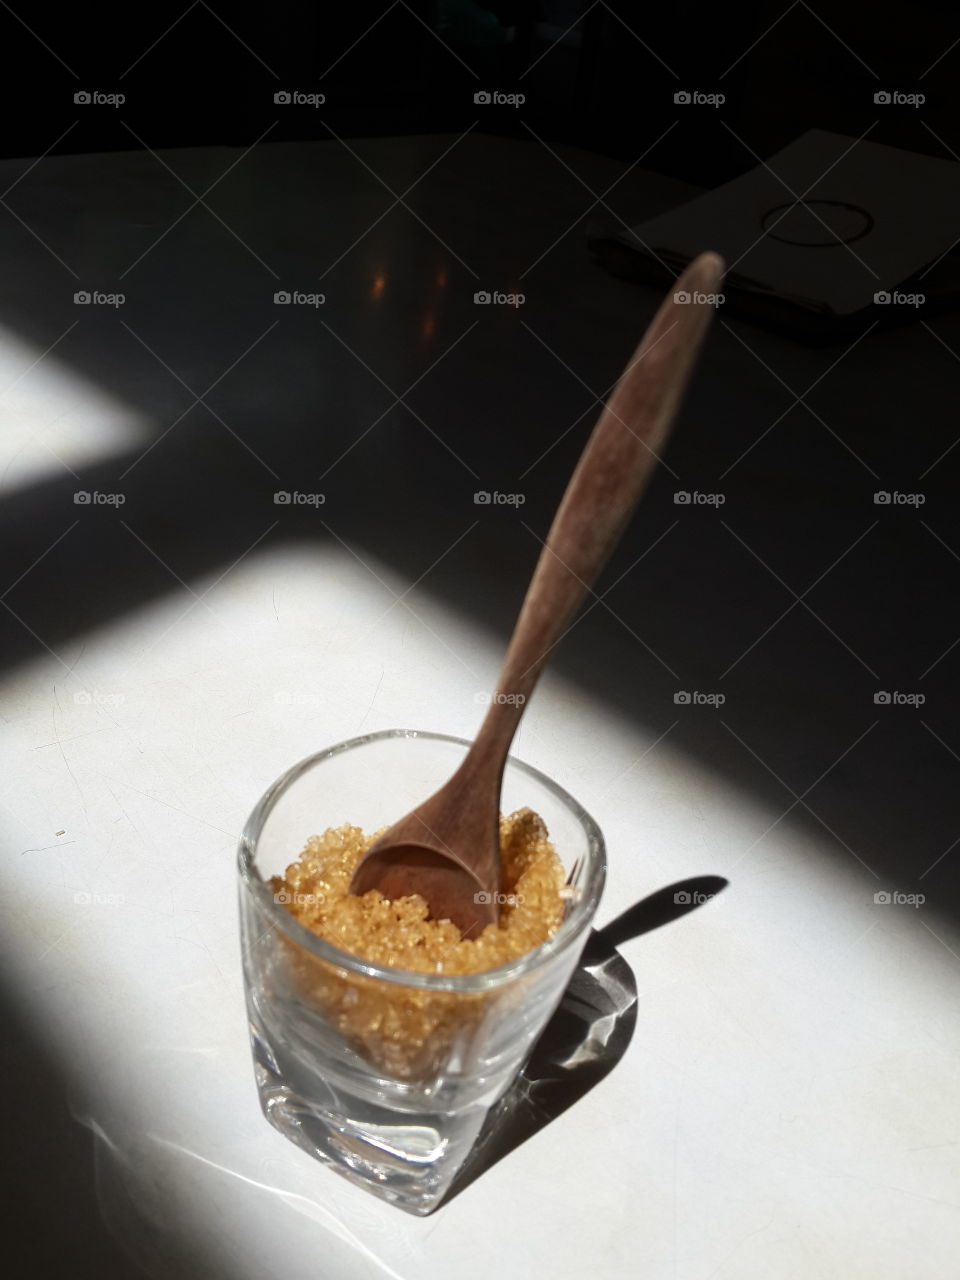 brown sugar. wooden spoon in small glass